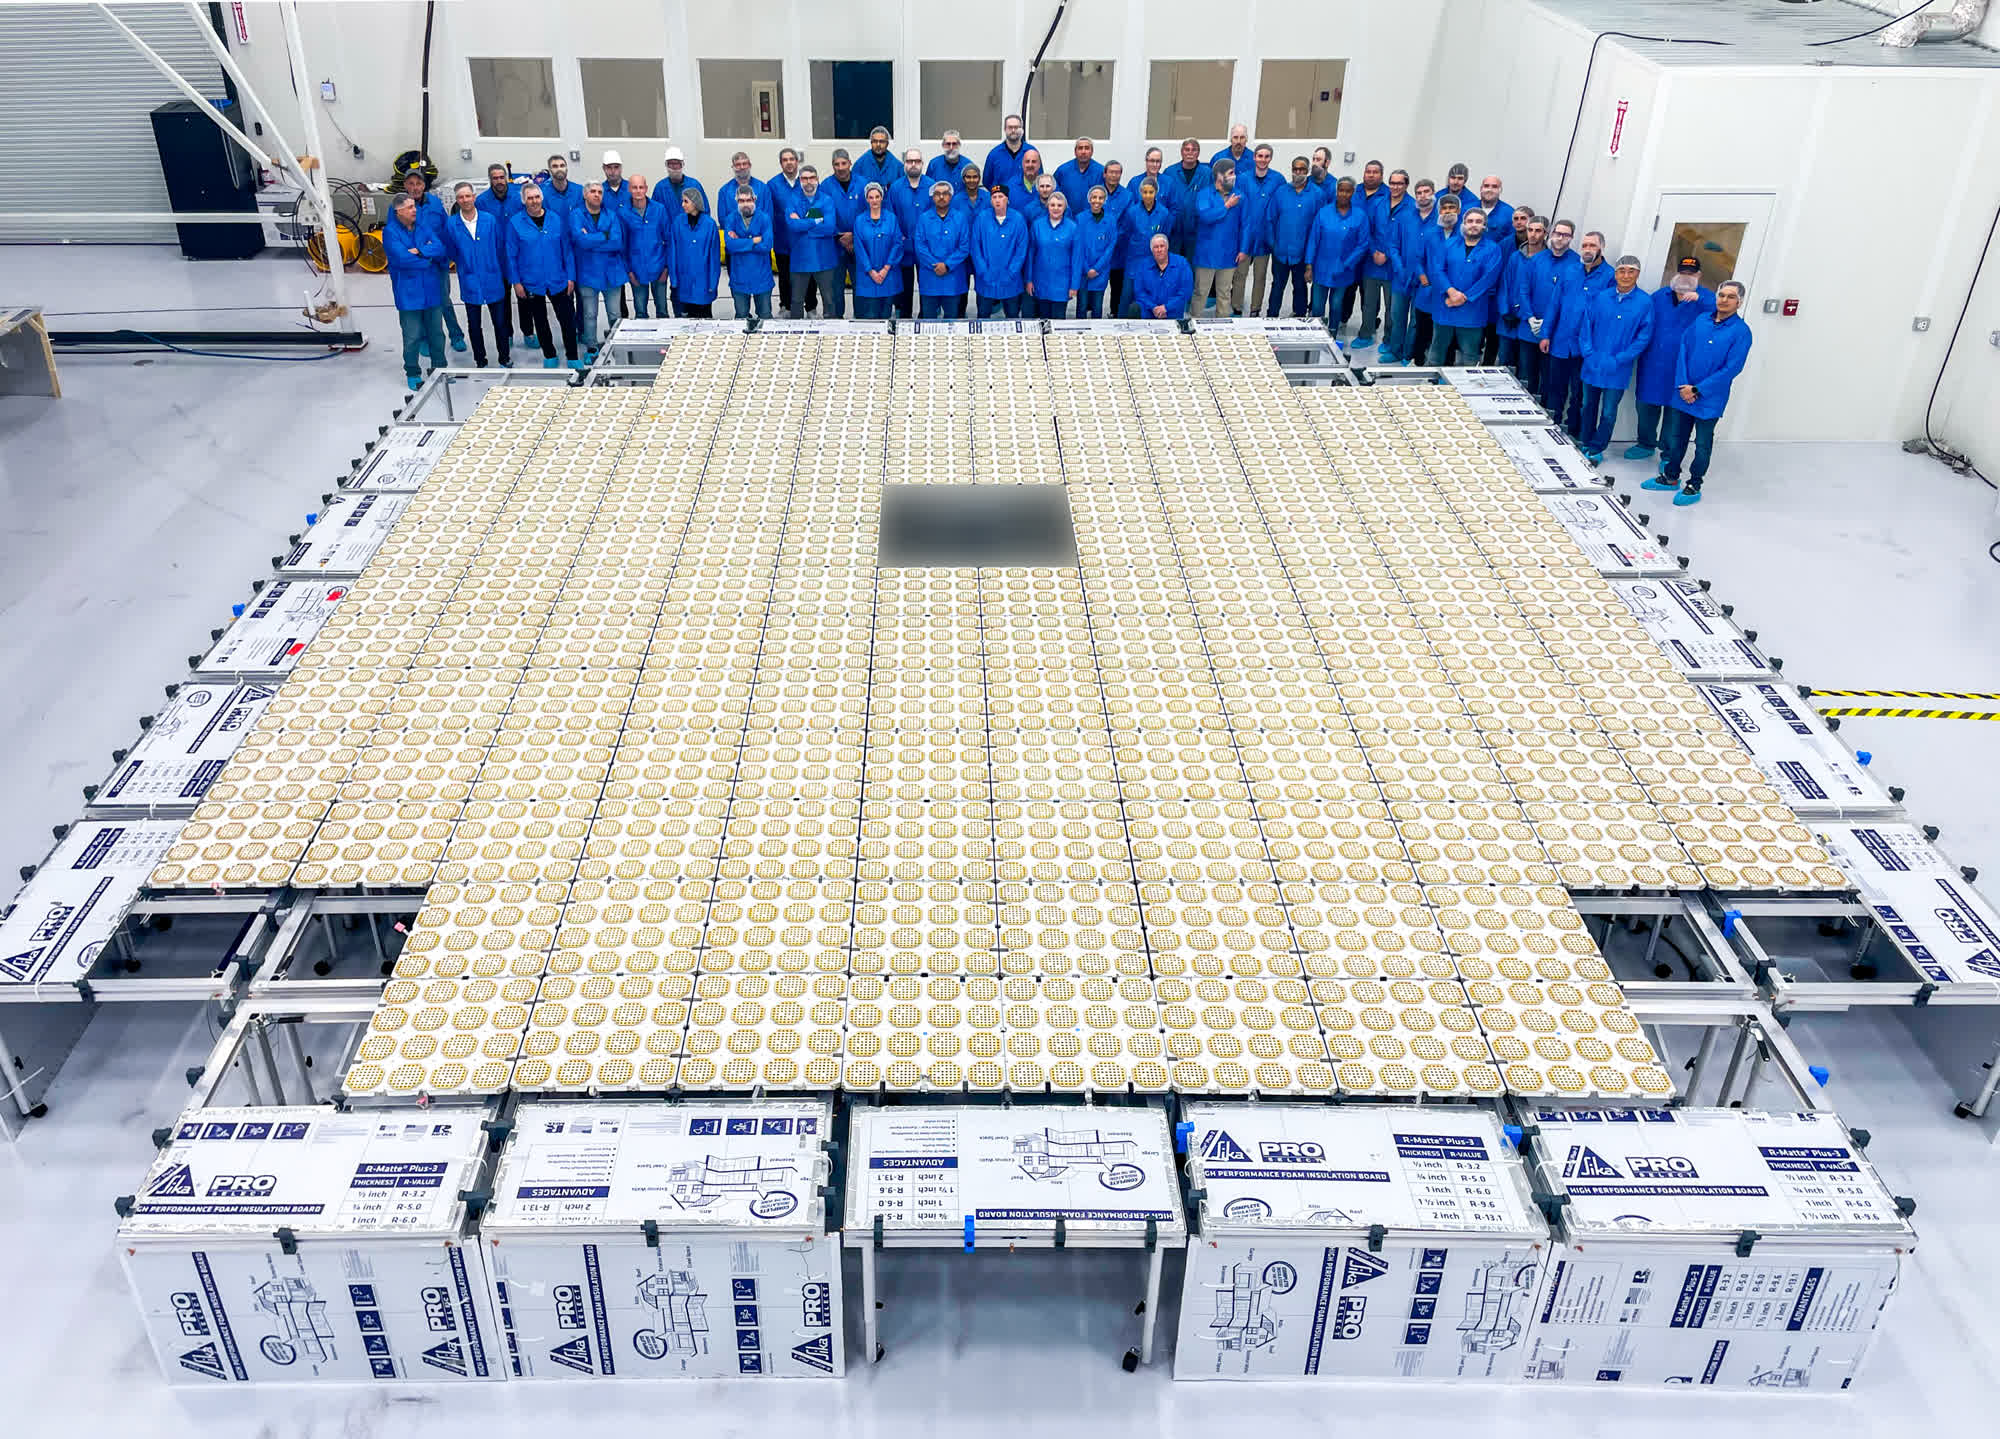 The largest-ever commercial communications satellite spans 693 square feet